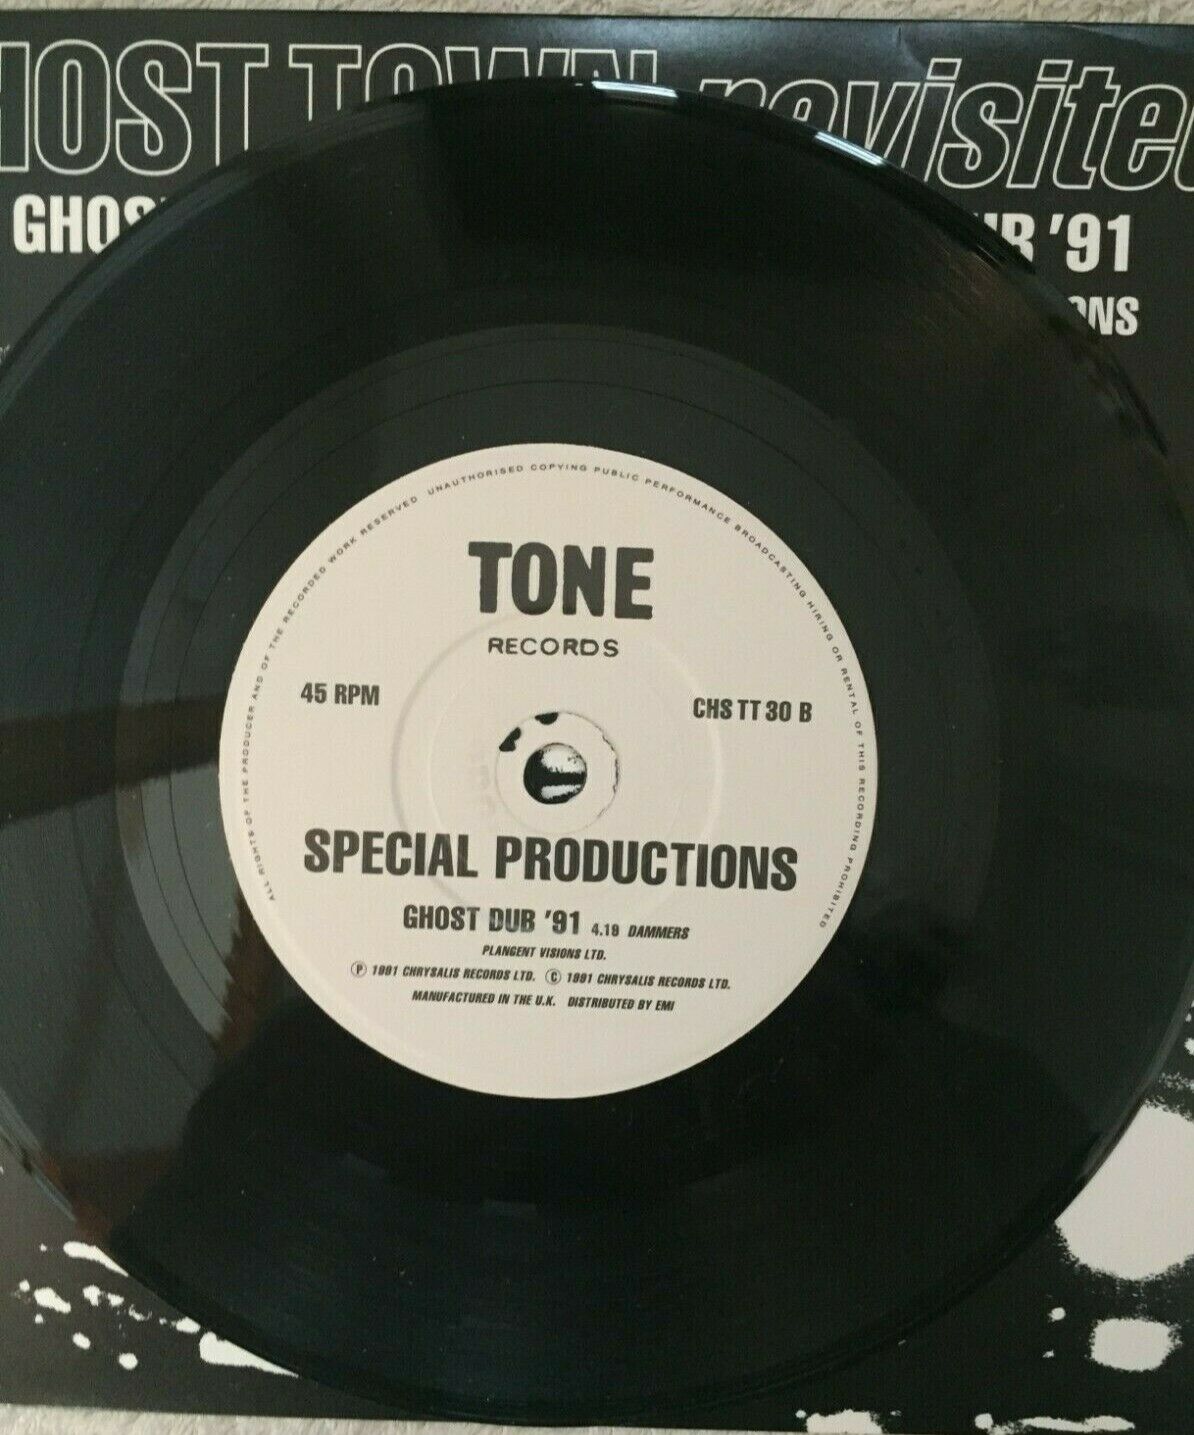 popsike.com - THE SPECIALS GHOST TOWN/GHOST DUB '91 2 TONE 7